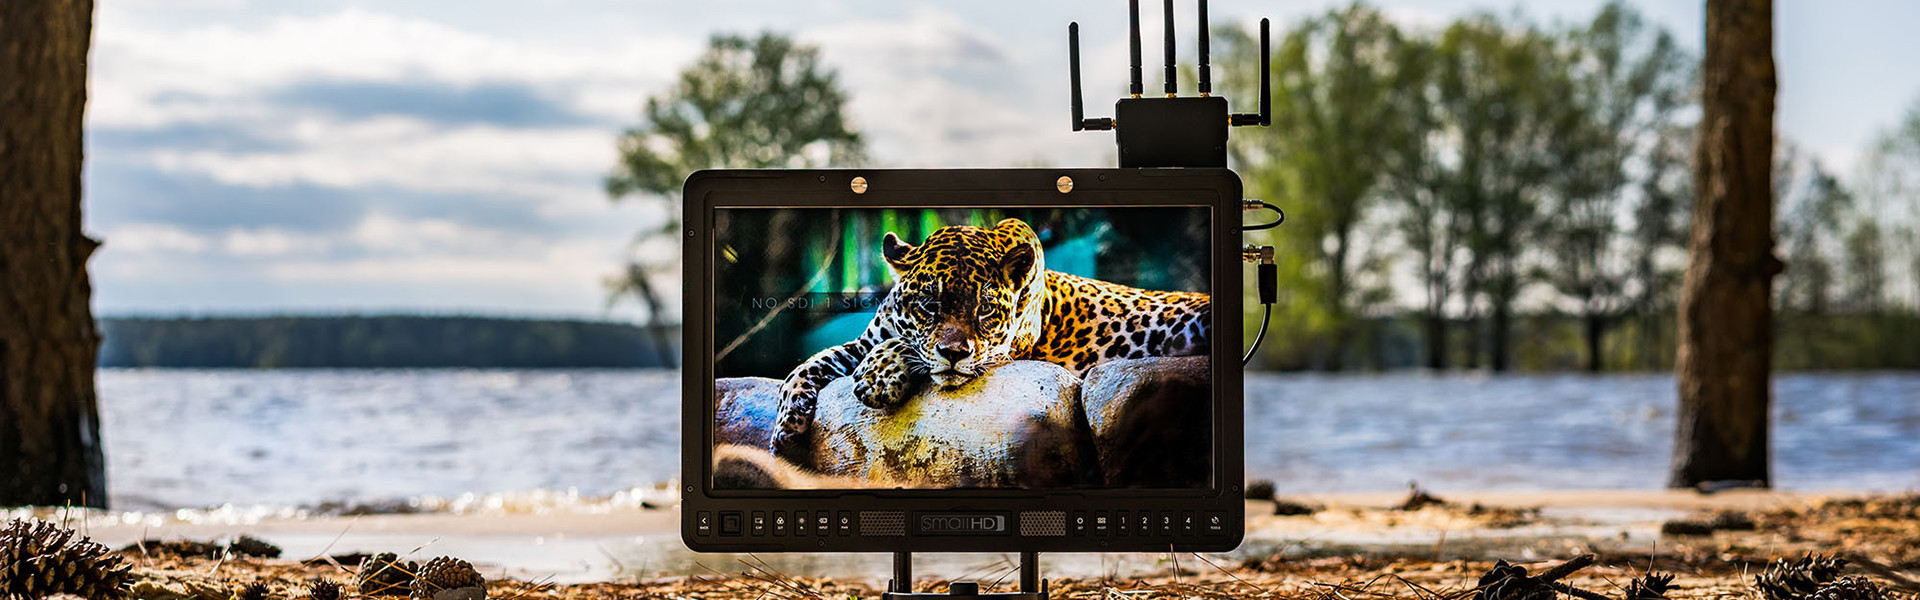 Header image for article SmallHD Introduces New SmallHDR Production Monitors